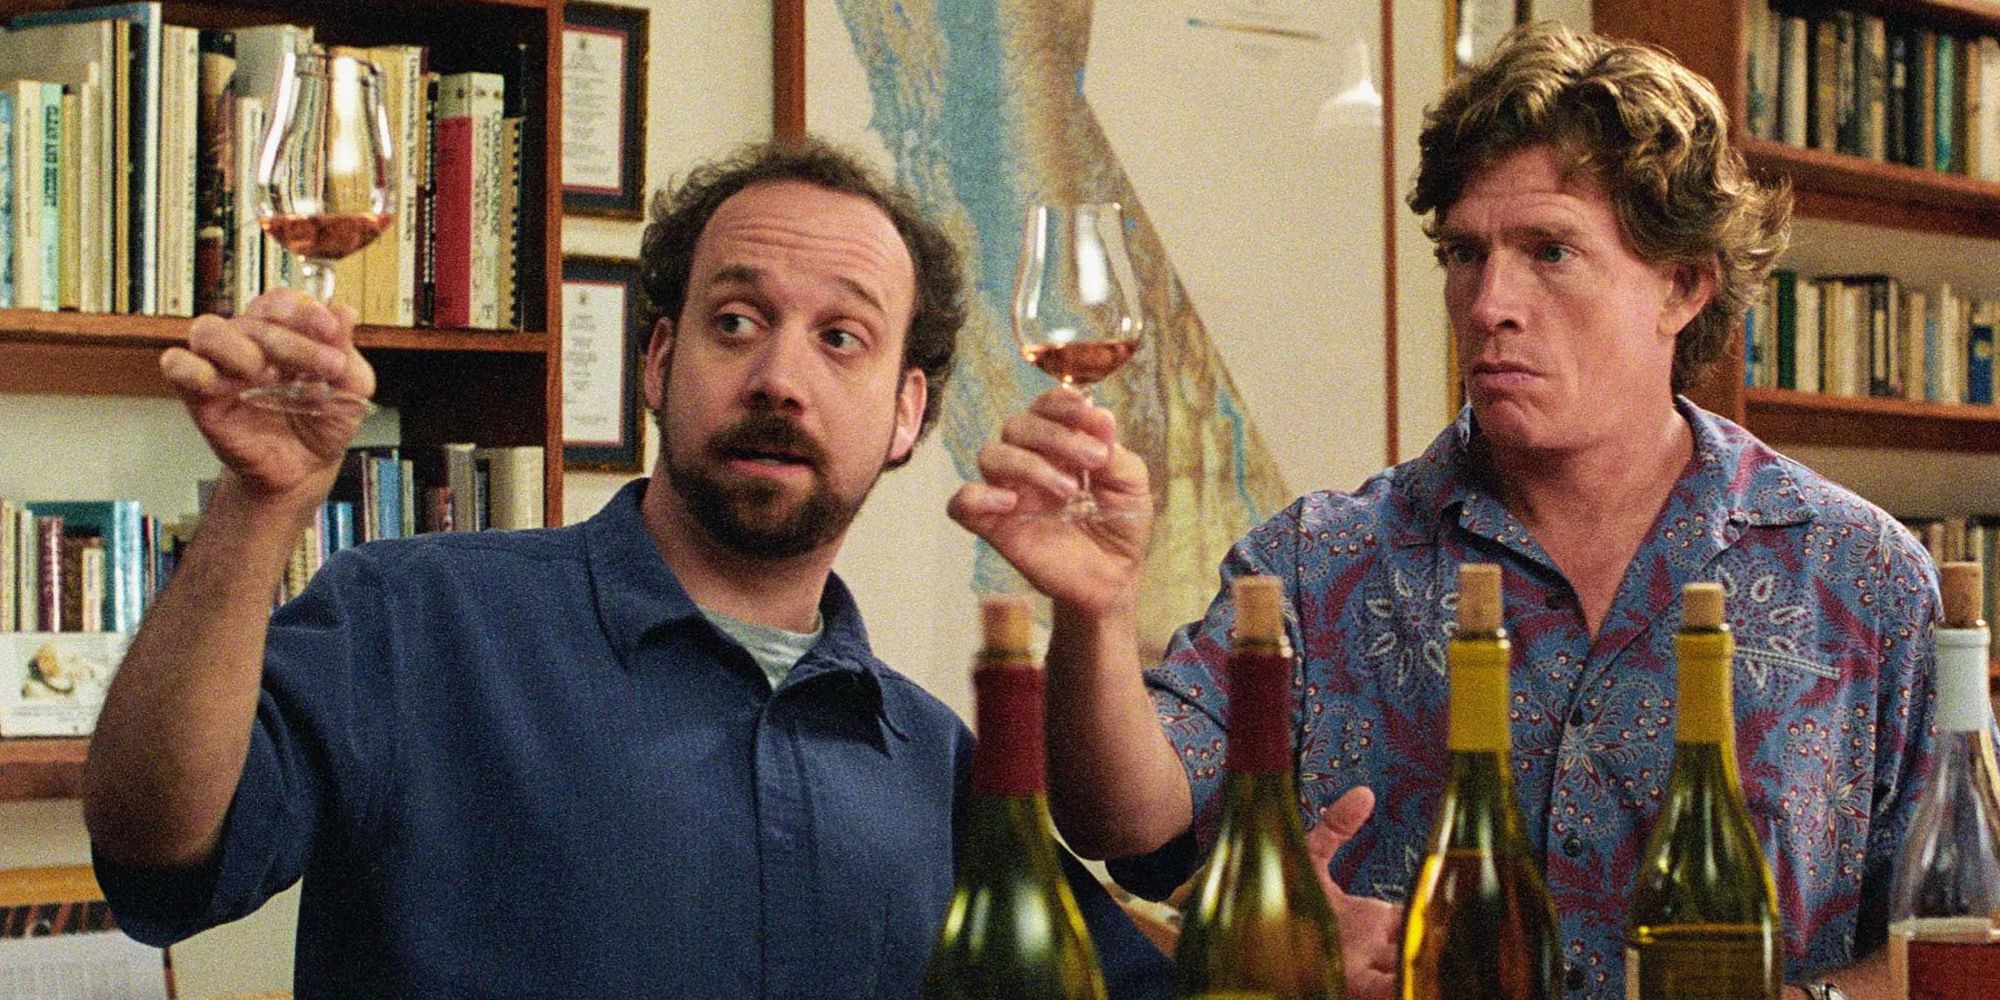 Paul Giamatti and Thomas Haden-Church as Miles and Jack toasting with glasses of wine in Sideways